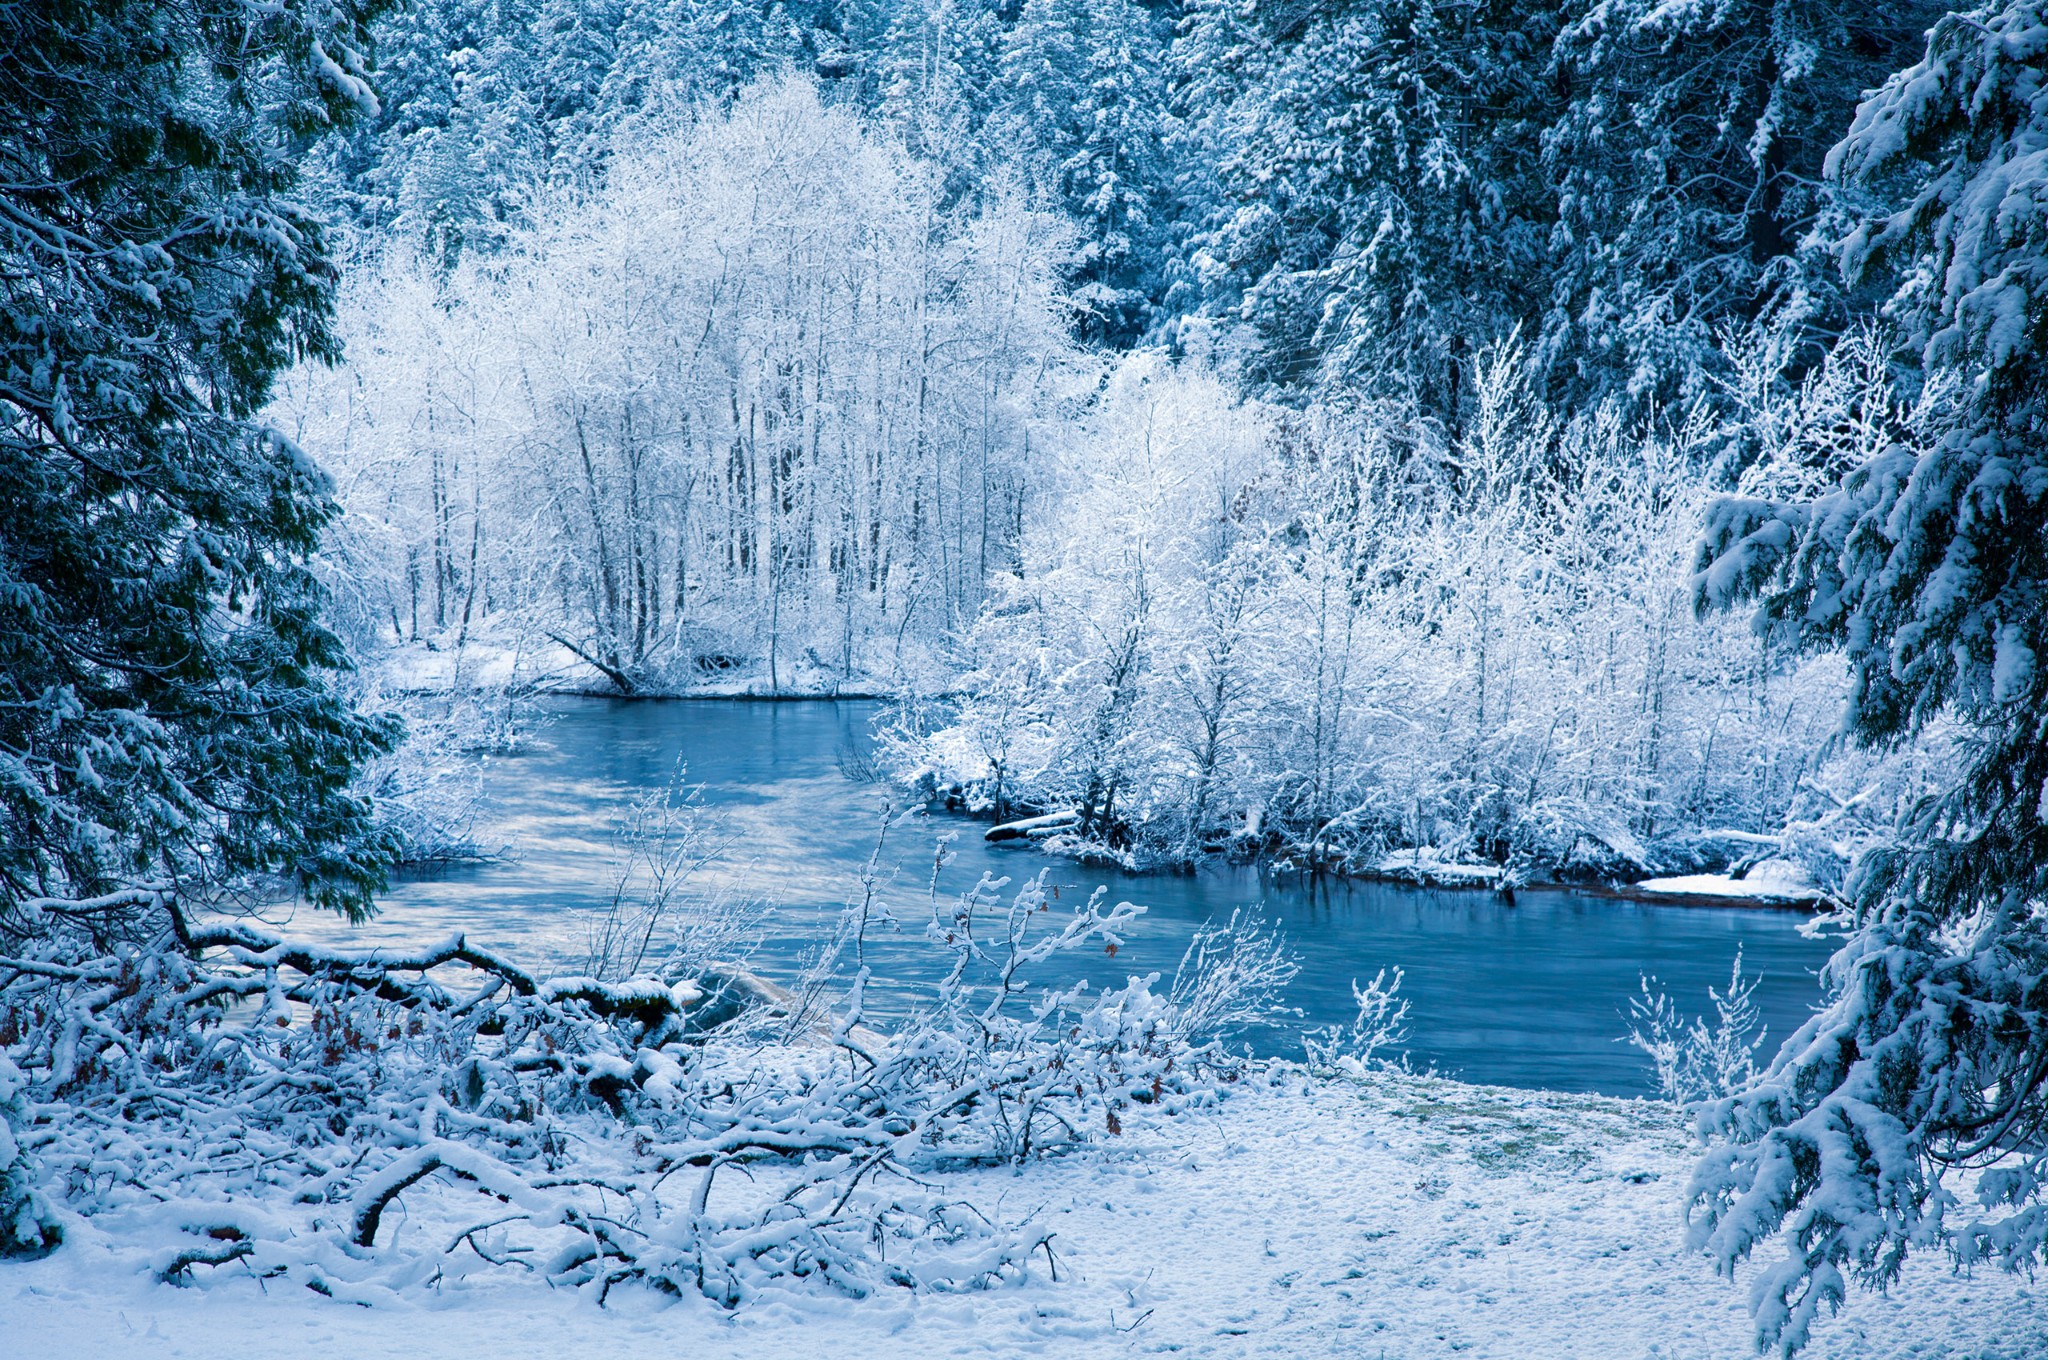 chrome os wallpapers,winter,natural landscape,snow,nature,water